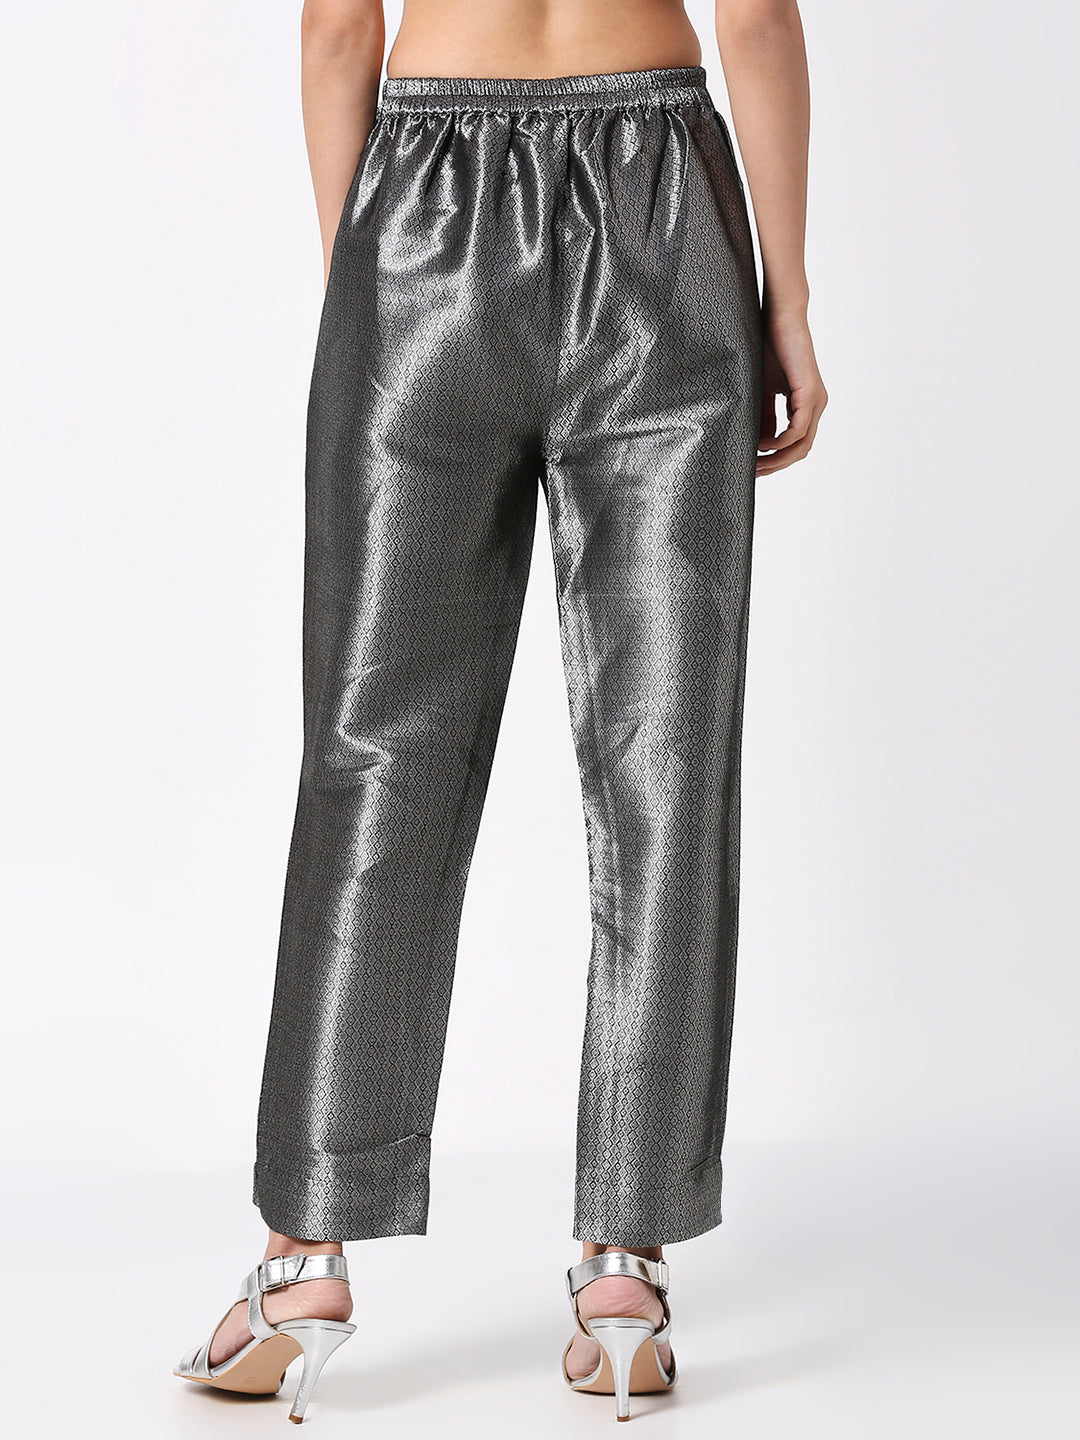 Black and Silver Dobby Designed Brocade Pant